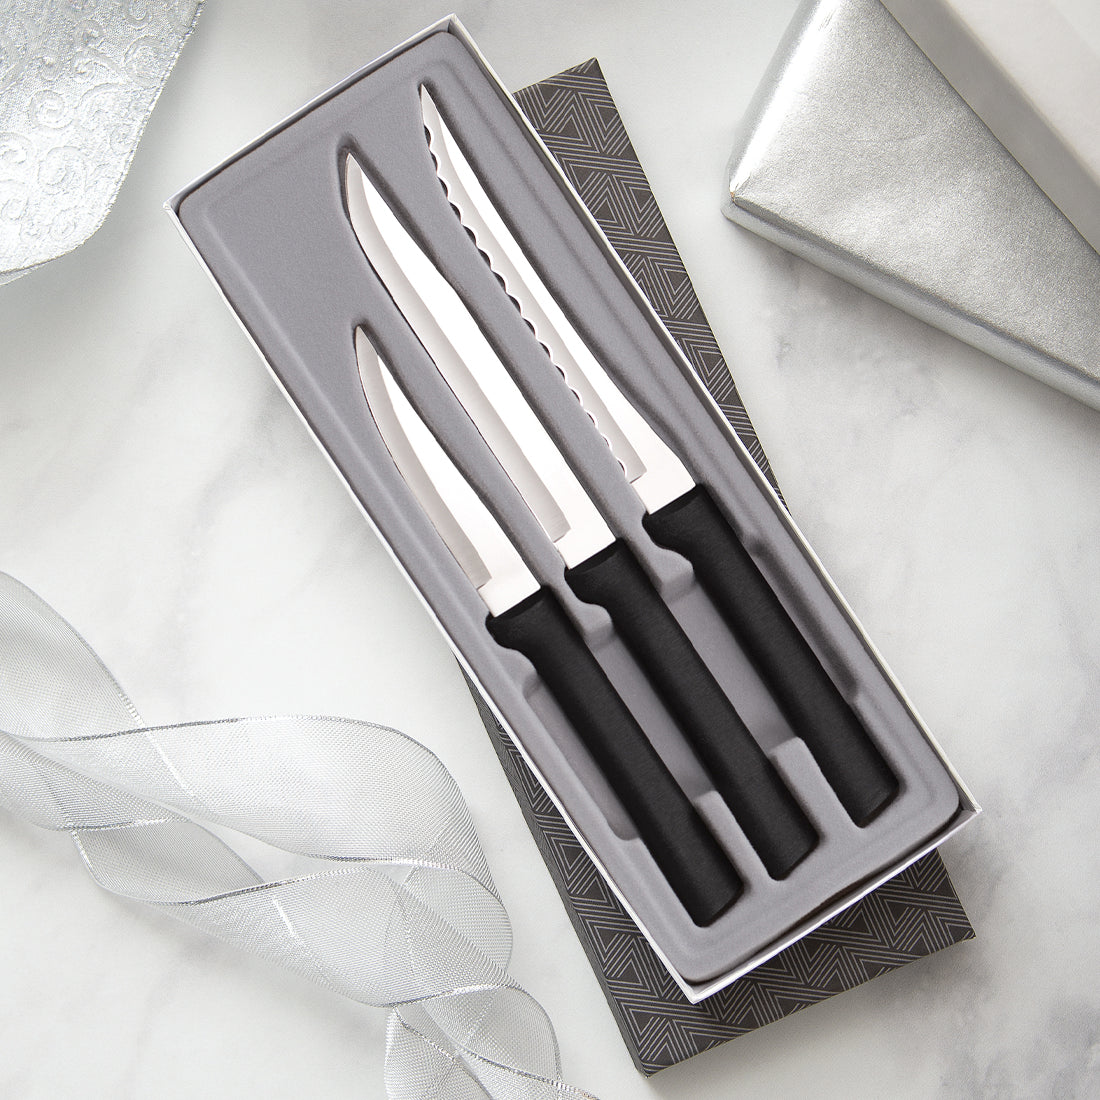 https://cdn.shopify.com/s/files/1/1842/3947/products/cooking-essentials-gift-set-G249-a_1600x.jpg?v=1601390732